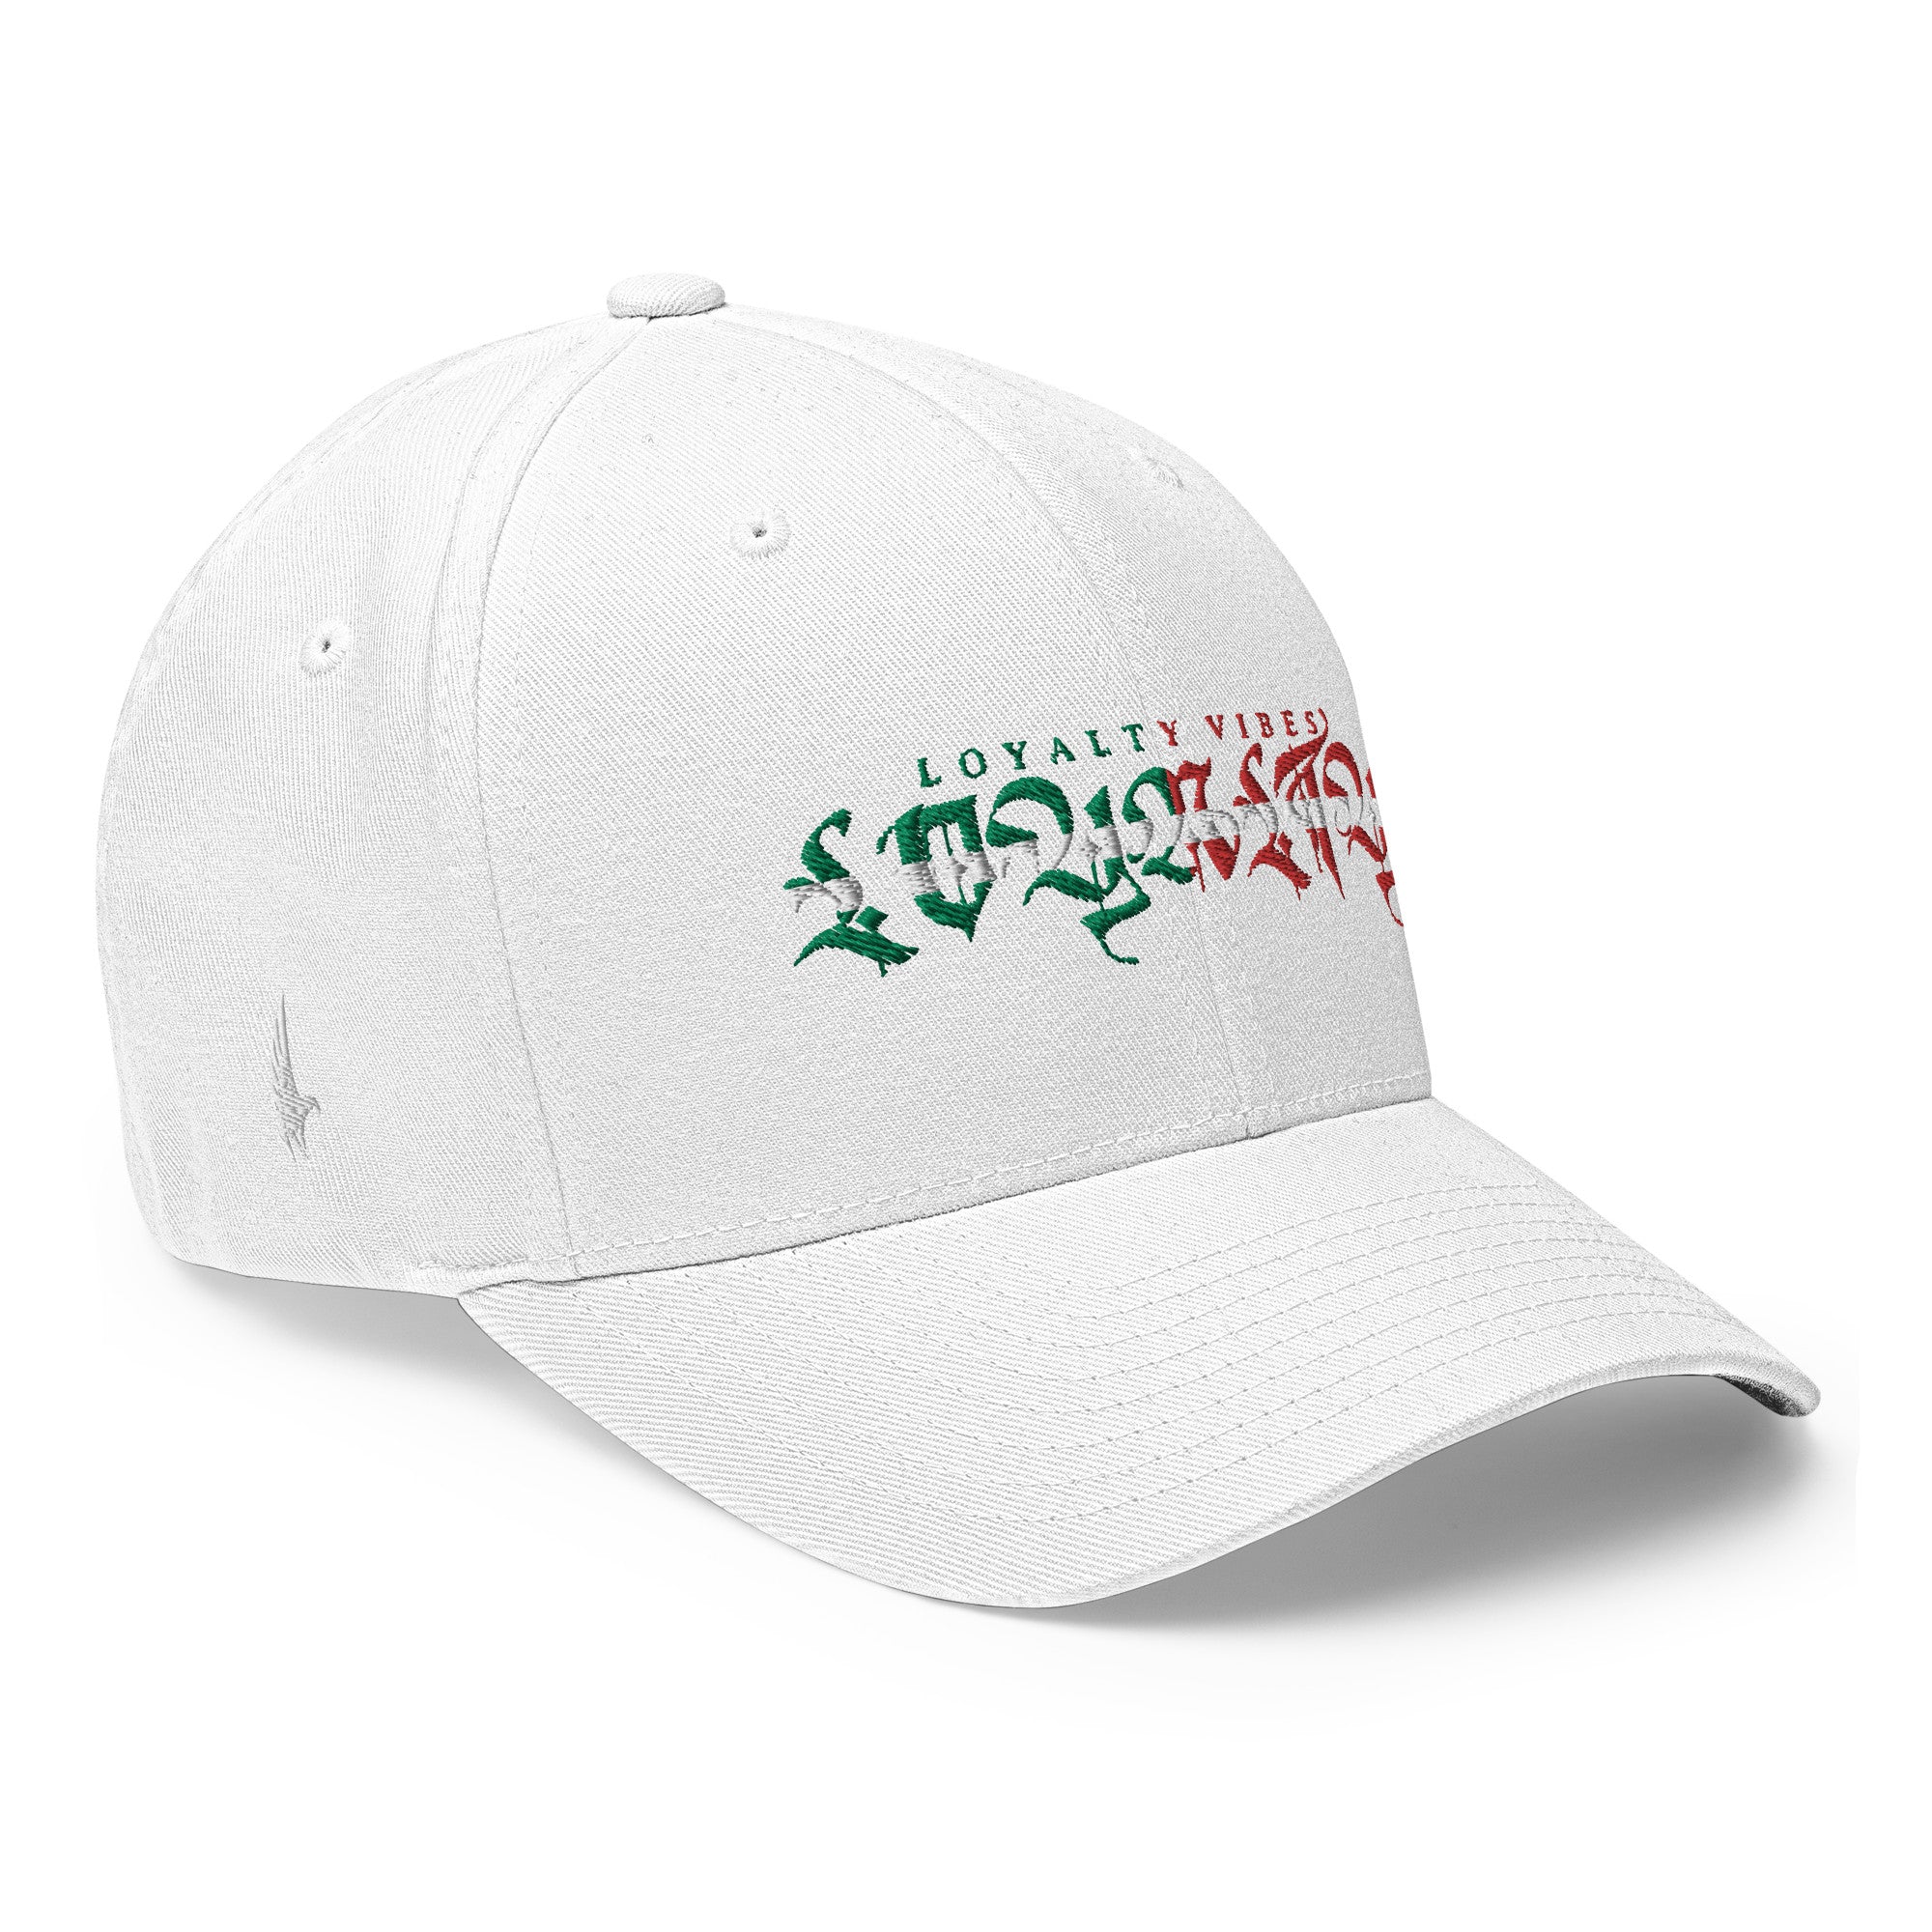 Gente Fitted Hat White - Loyalty Vibes